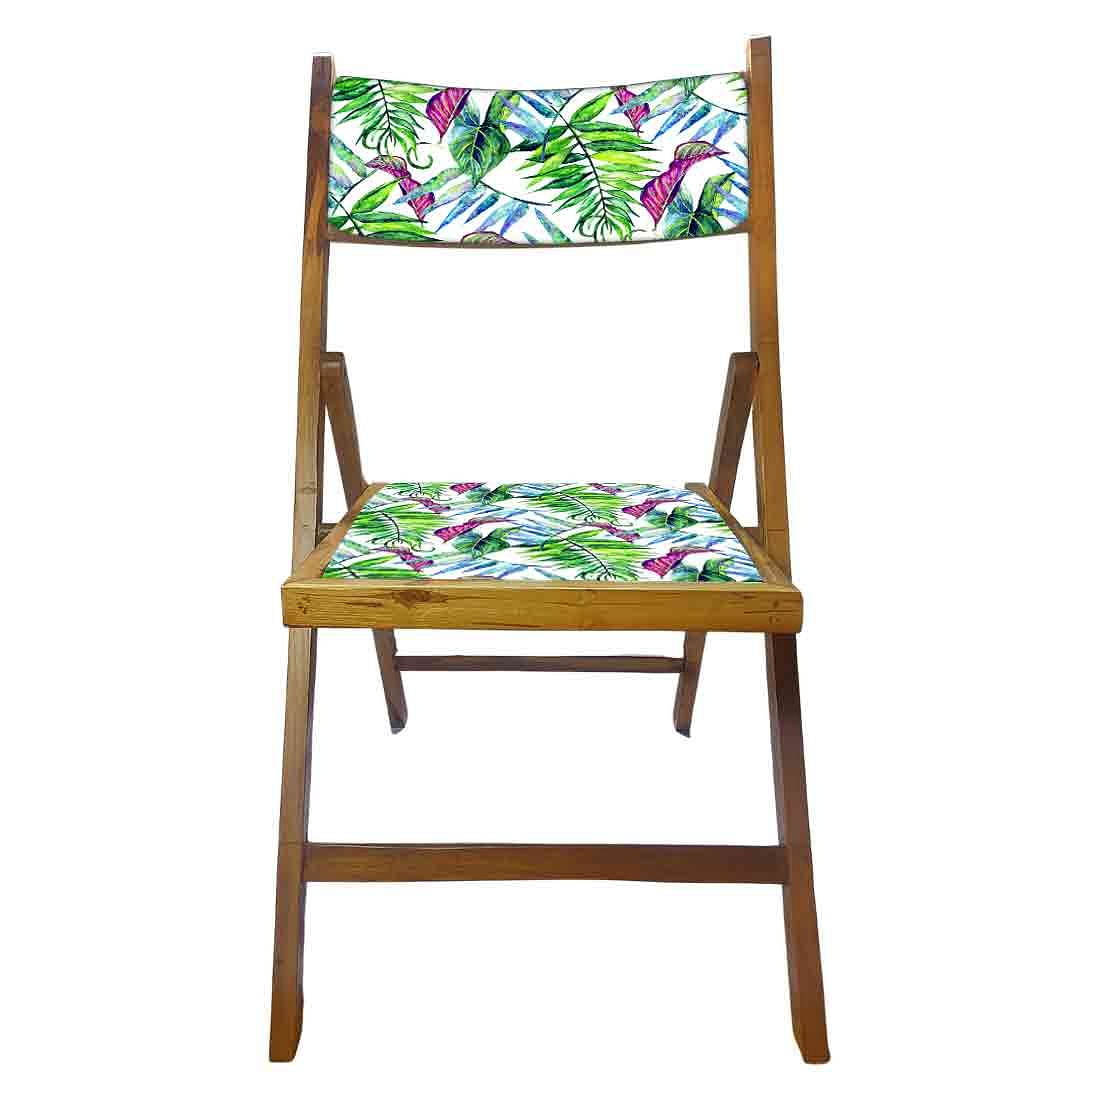 Nutcase Folding Wooden Chair For Home Dining  - Green Pink Neon Leaves Nutcase